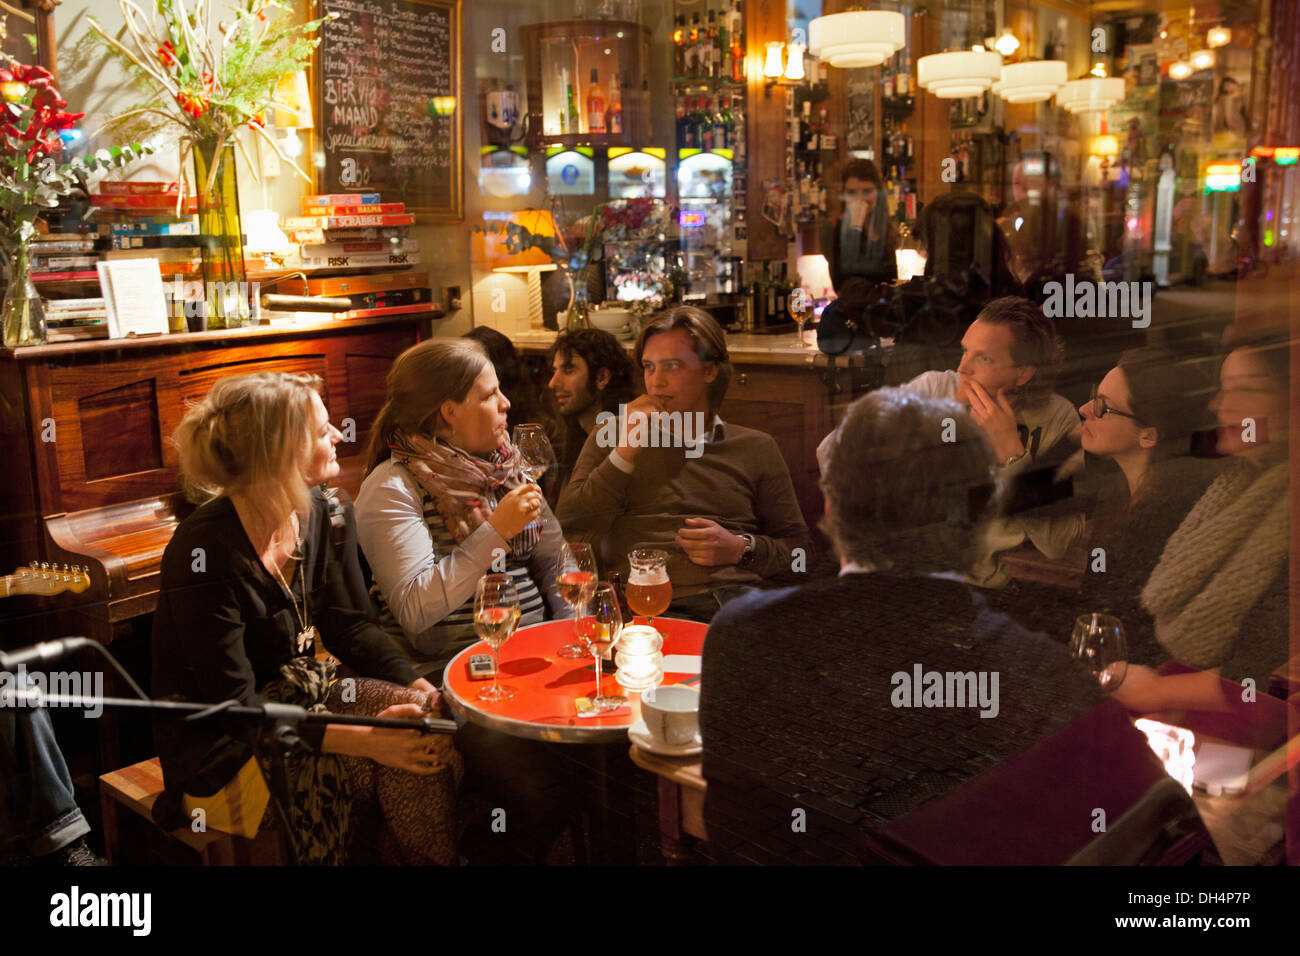 Netherlands, Amsterdam, People chatting and having a drink in brown cafe called Moncafe Stock Photo